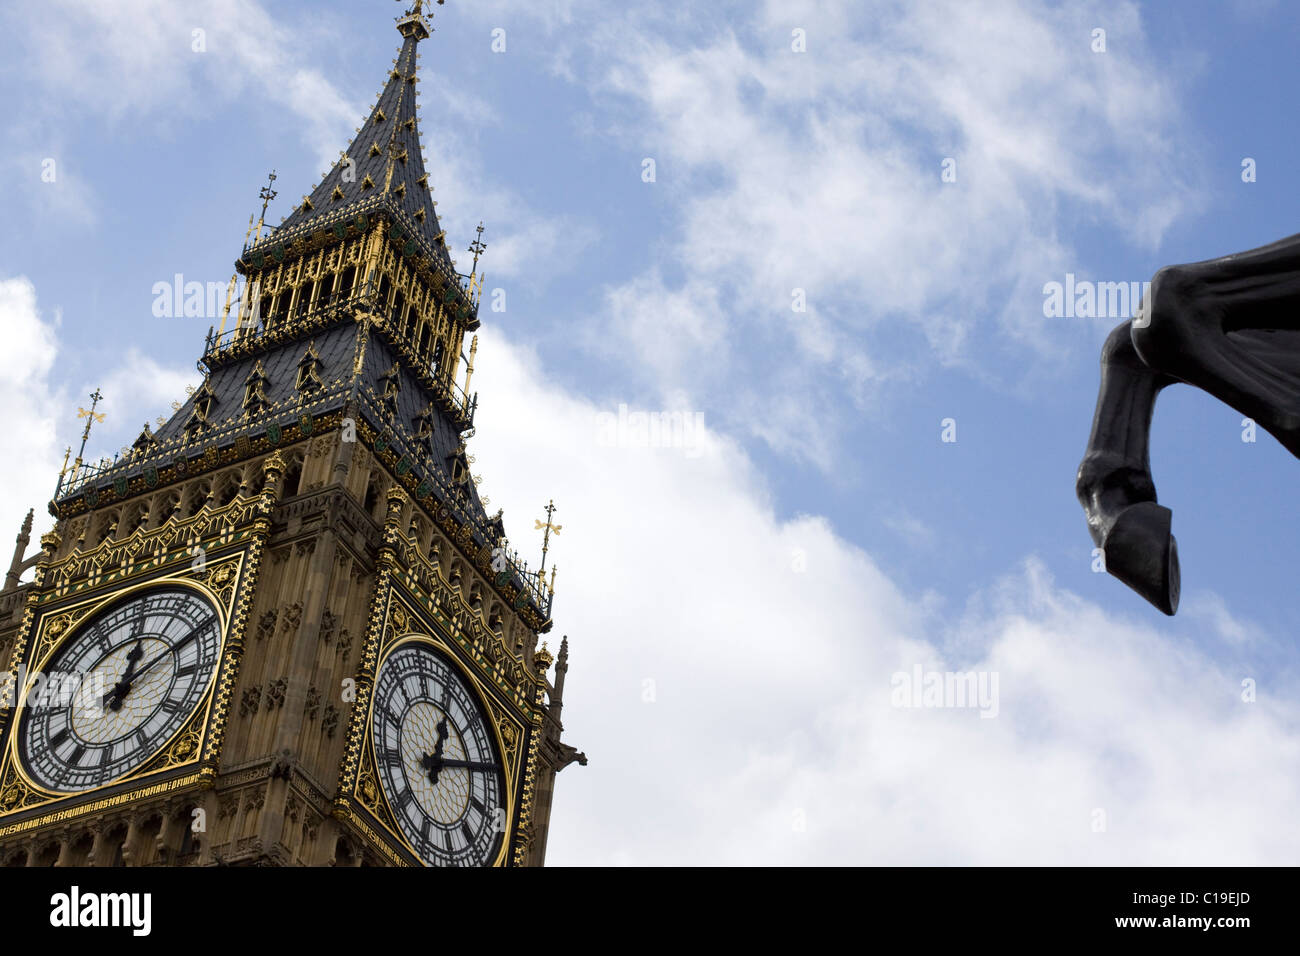 Abstract view of Big Ben with A bronze horse in front of it Stock Photo